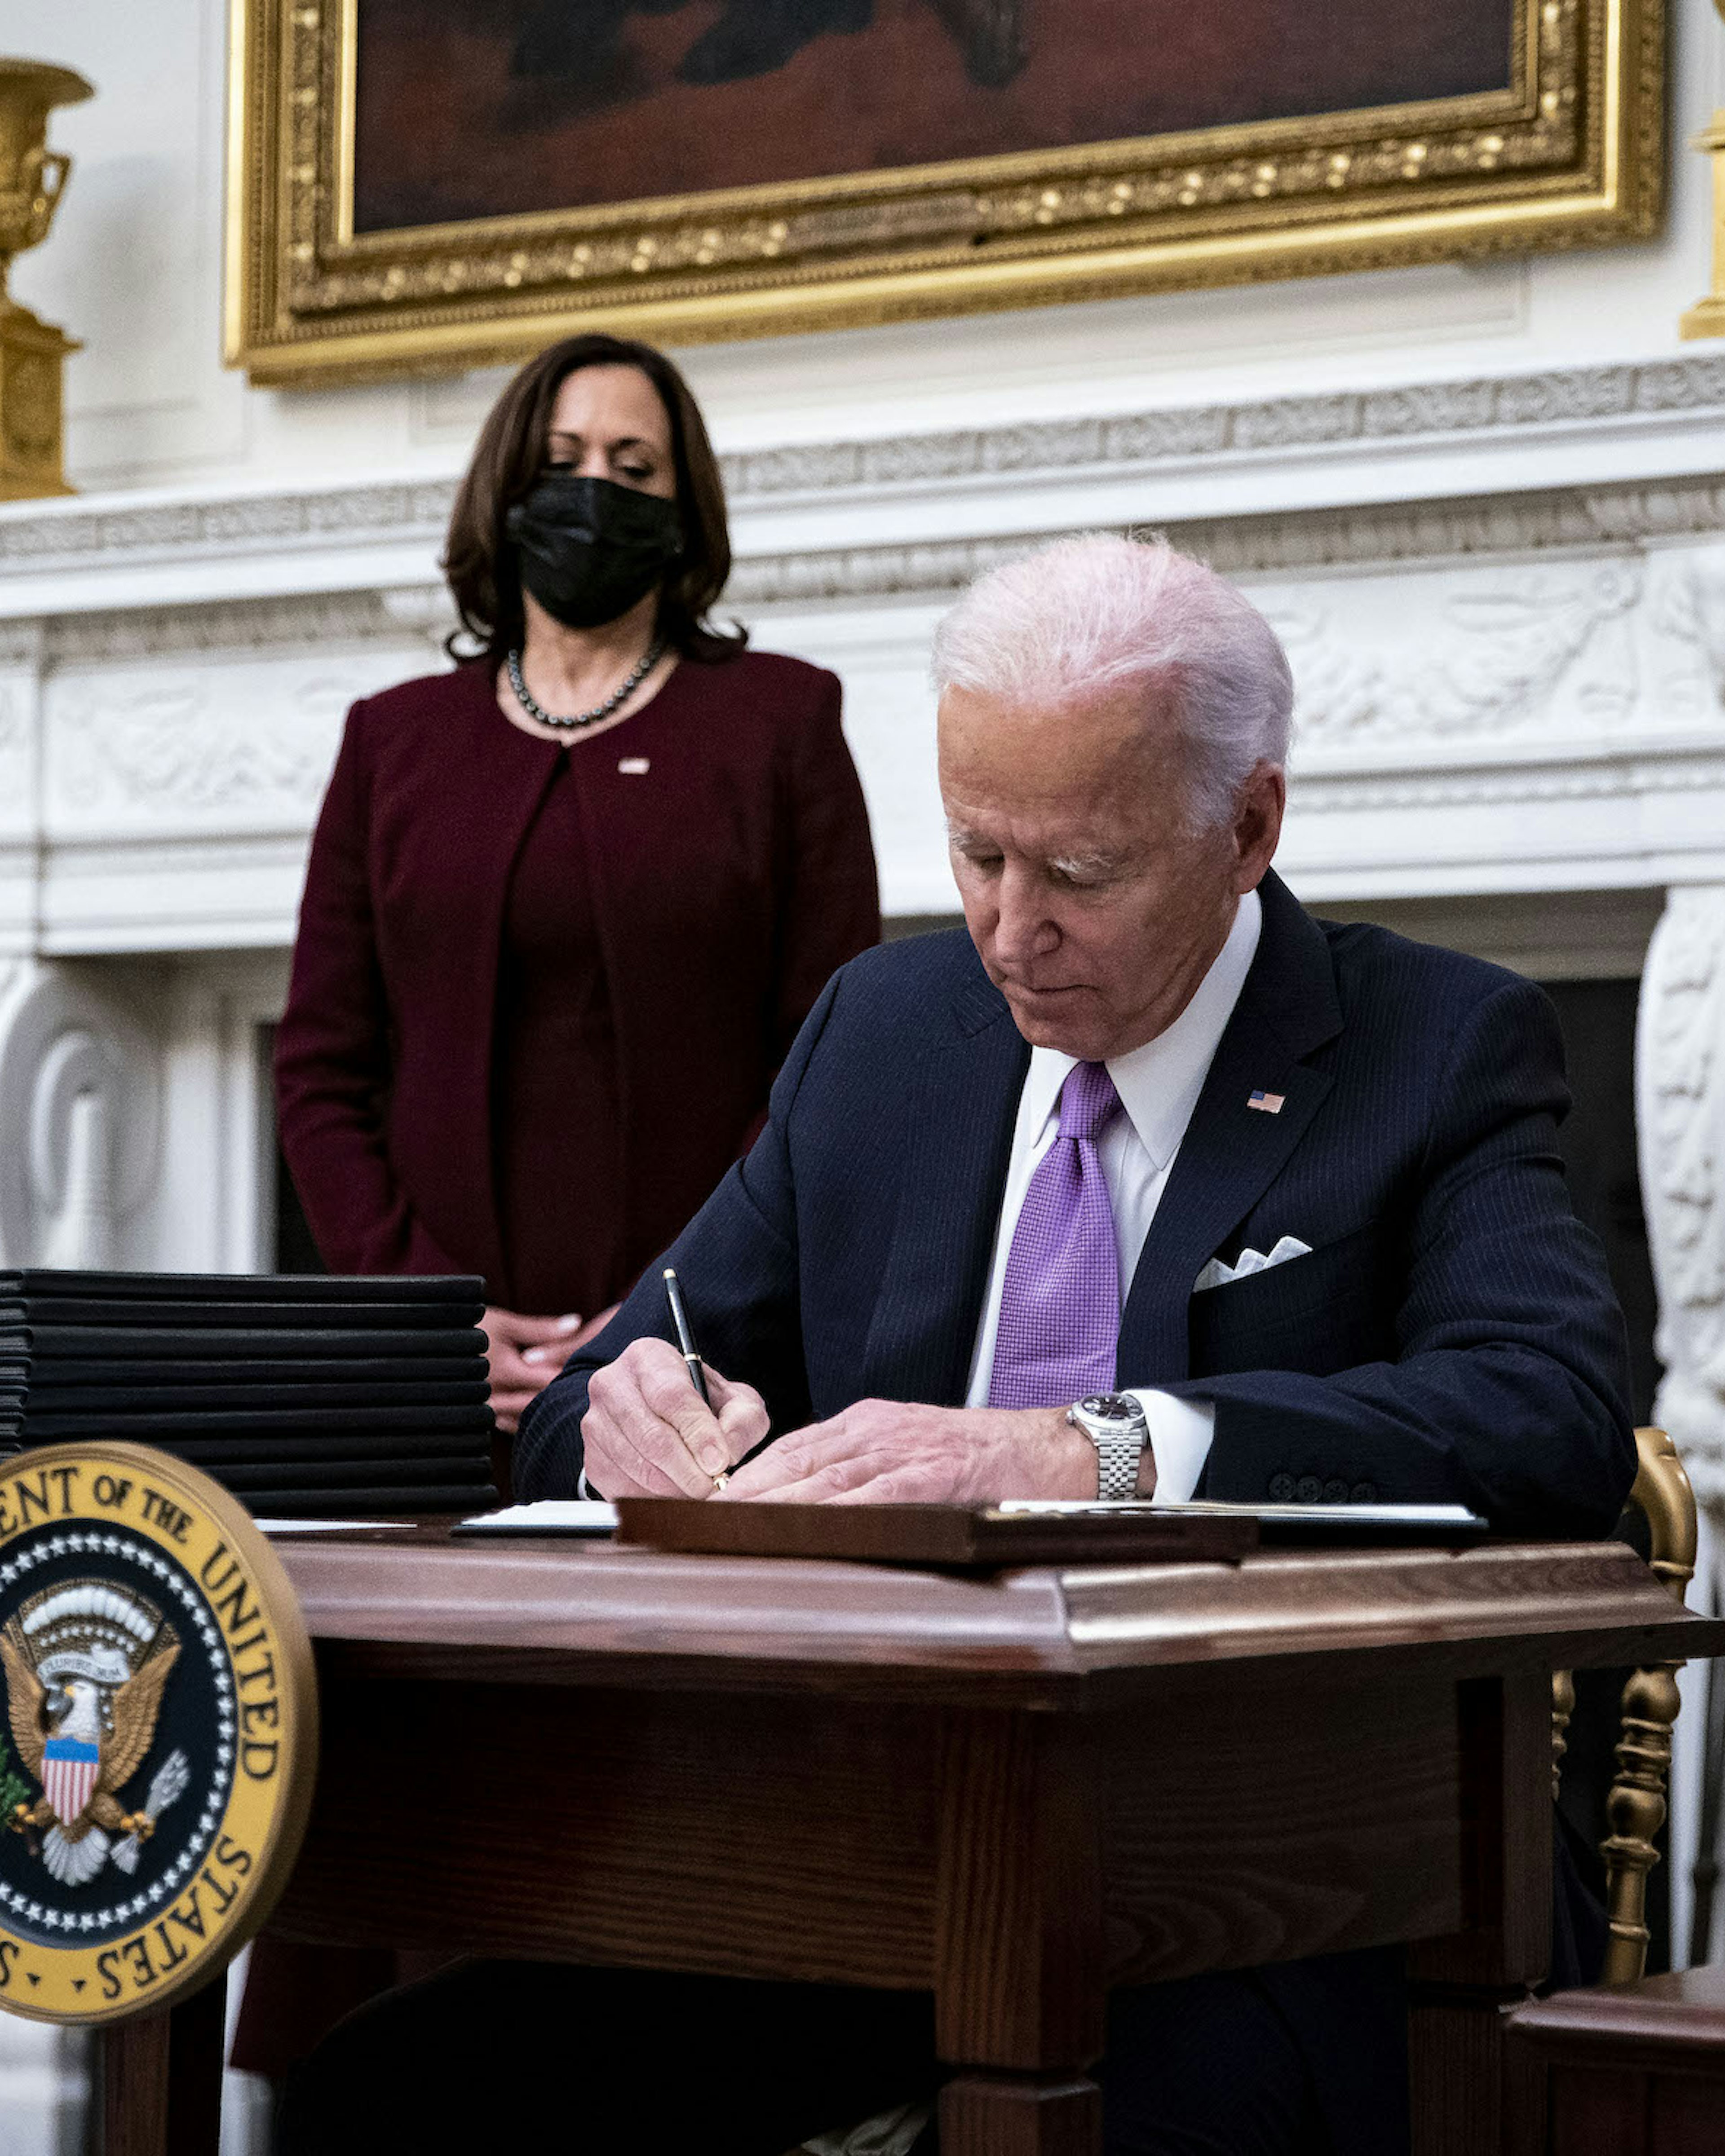 U.S. President Joe Biden signs an executive order after speaking during an event on his administration's Covid-19 response with U.S. Vice President Kamala Harris, left, in the State Dining Room of the White House in Washington, D.C., U.S., on Thursday, Jan. 21, 2021. Biden in his first full day in office plans to issue a sweeping set of executive orders to tackle the raging Covid-19 pandemic that will rapidly reverse or refashion many of his predecessor's most heavily criticized policies. Photographer: Al Drago/Bloomberg